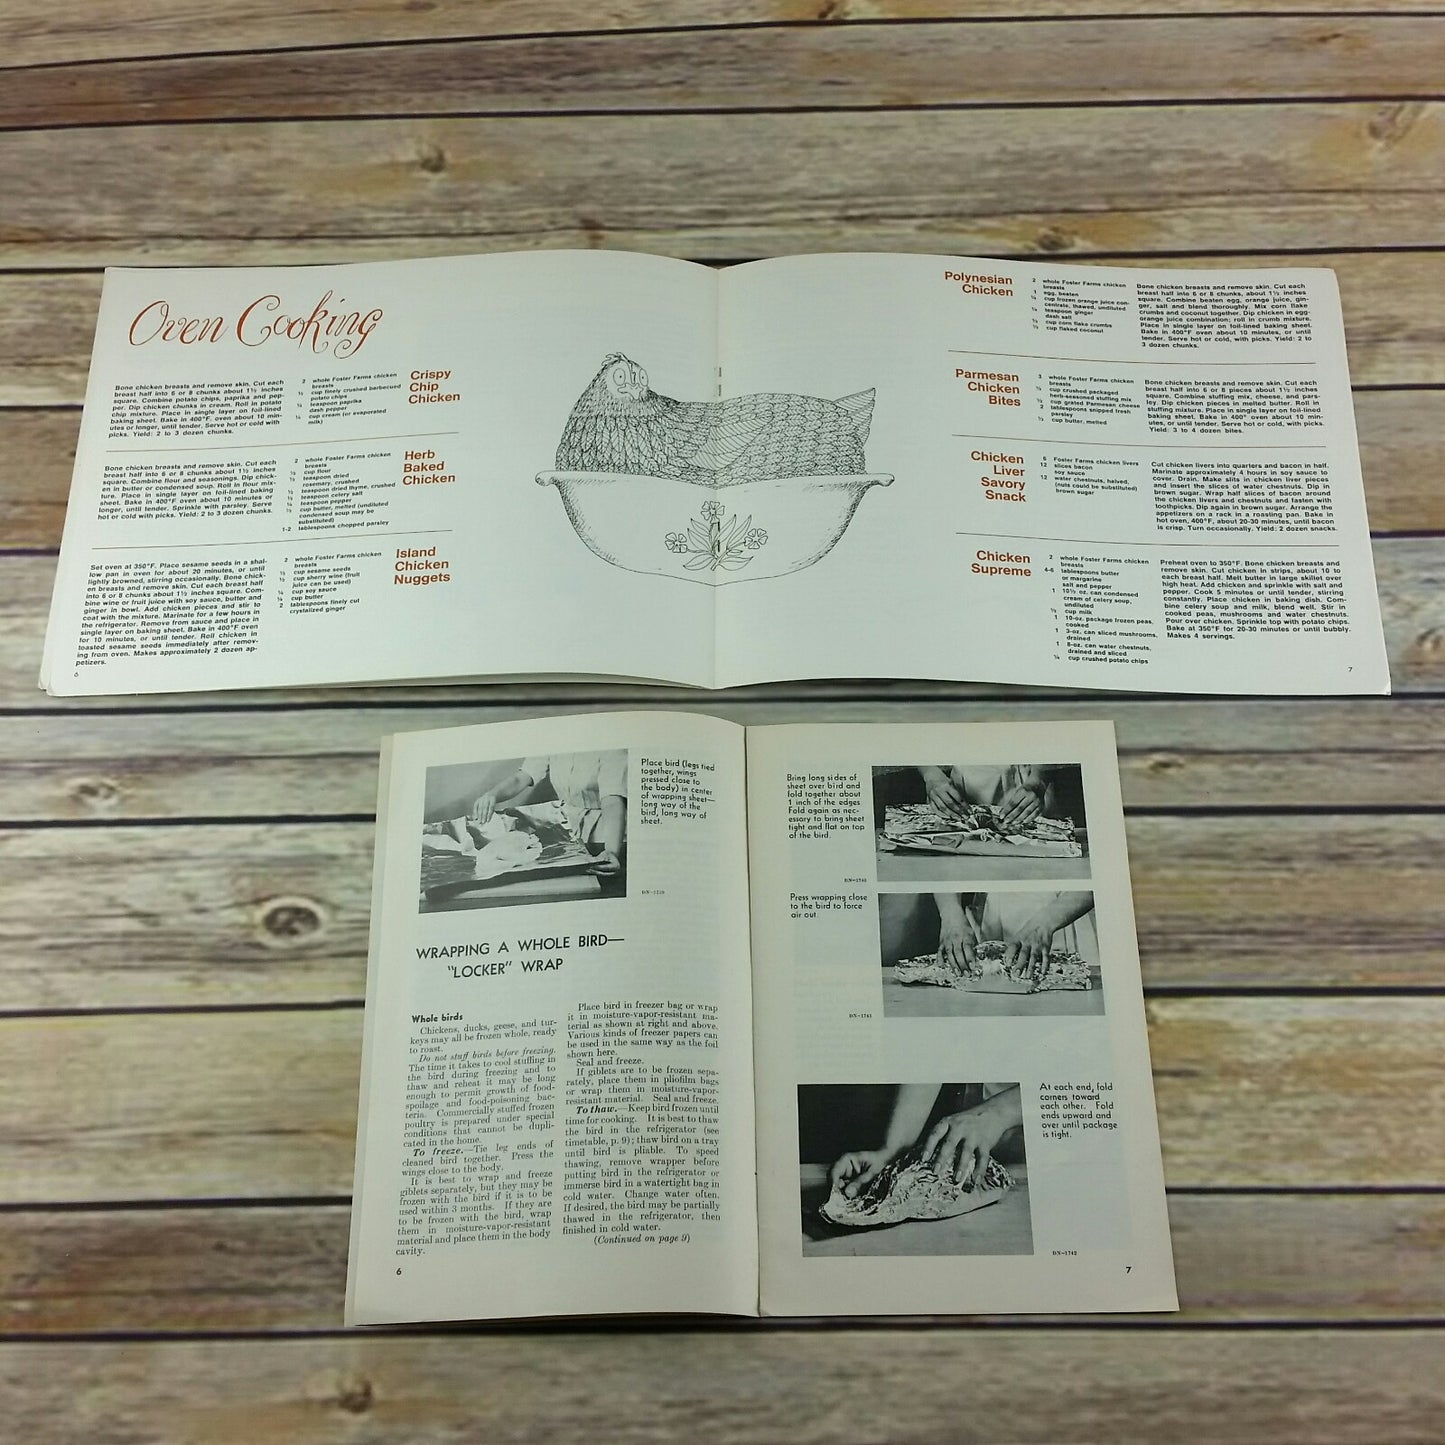 Vintage Cookbook Foster Farms Promo Booklets Lot of 2 Poultry Chicken Dept of Agriculture 1967 - At Grandma's Table